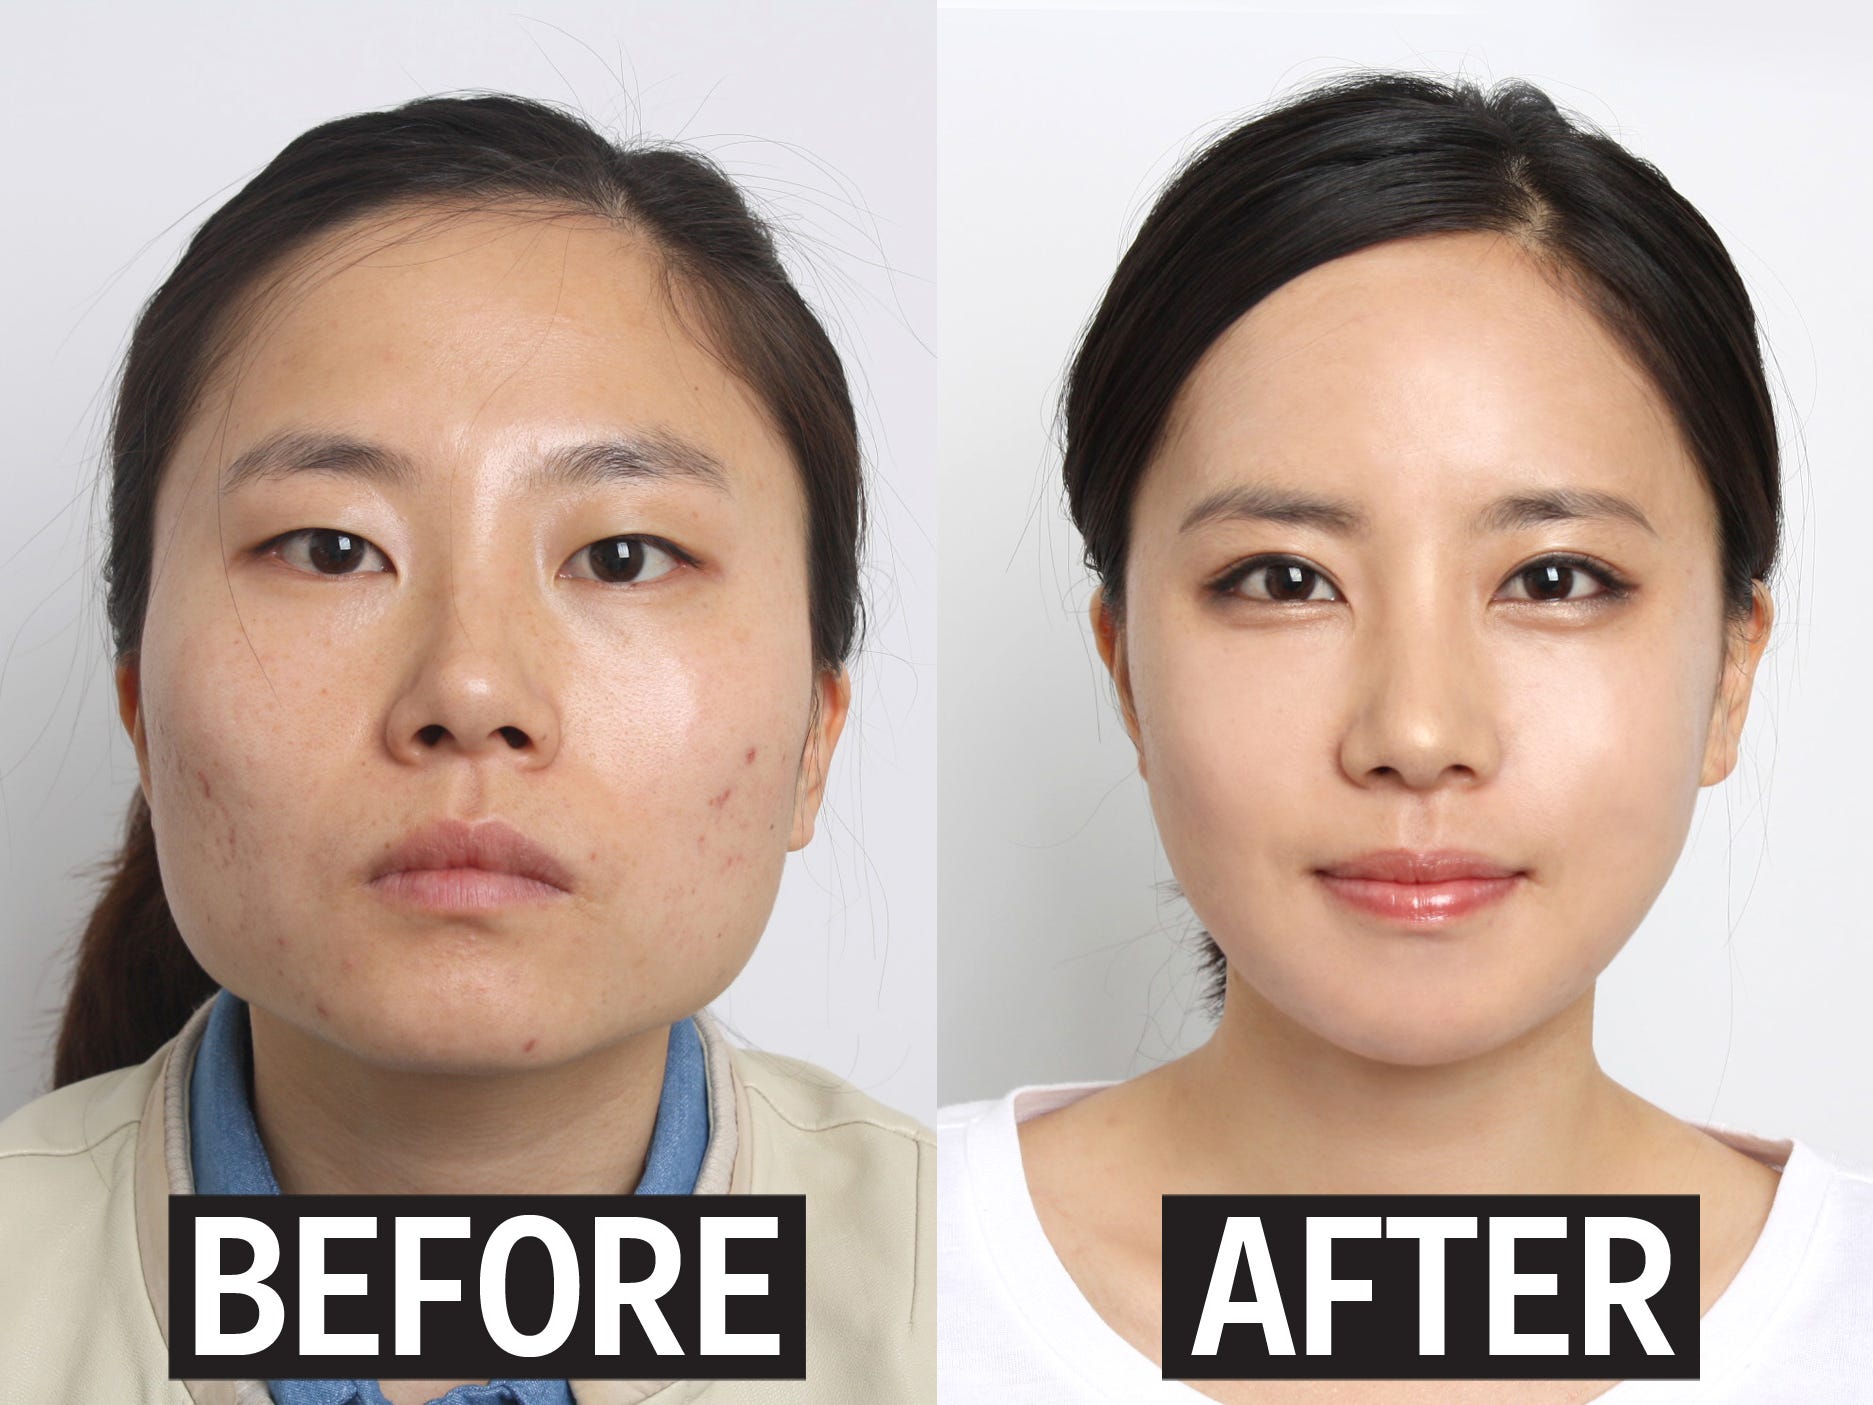 why-korean-parents-are-having-their-kids-get-plastic-surgery-before-college.jpg